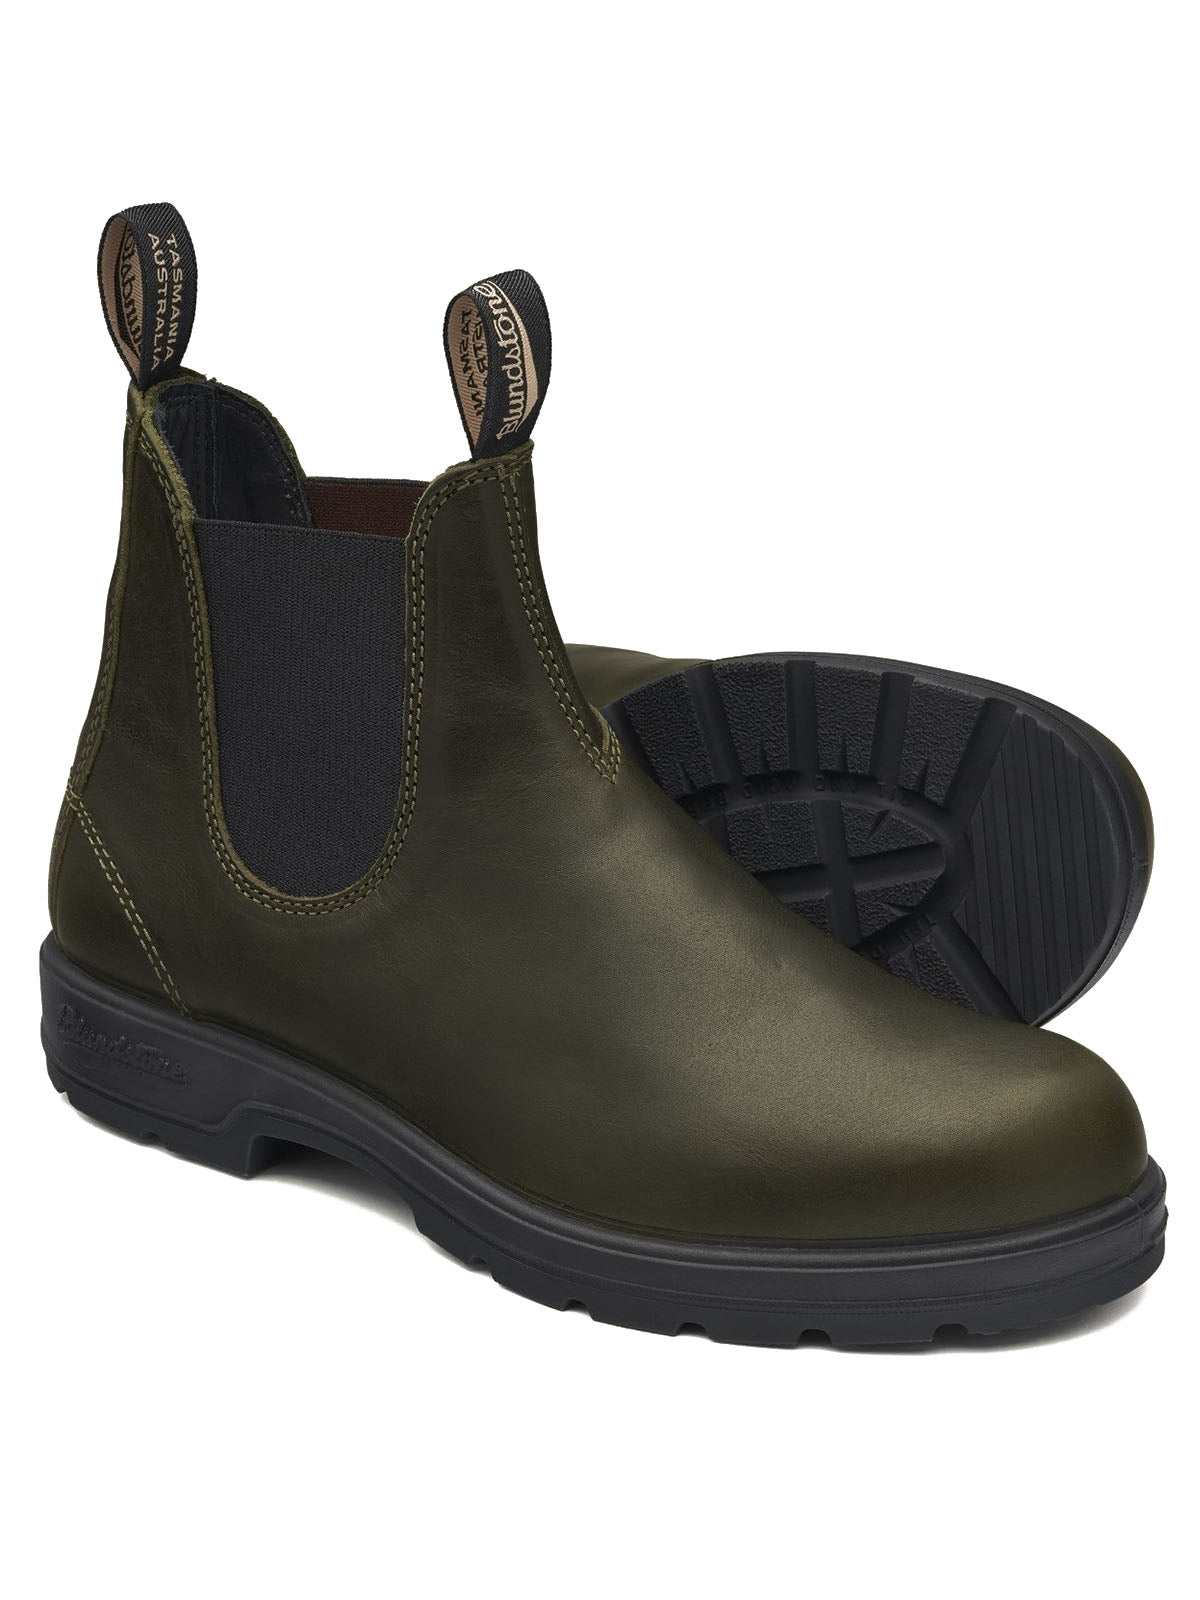 Blundstone Men's Boots - 2052 Lined Elastic Sided Boot - Green